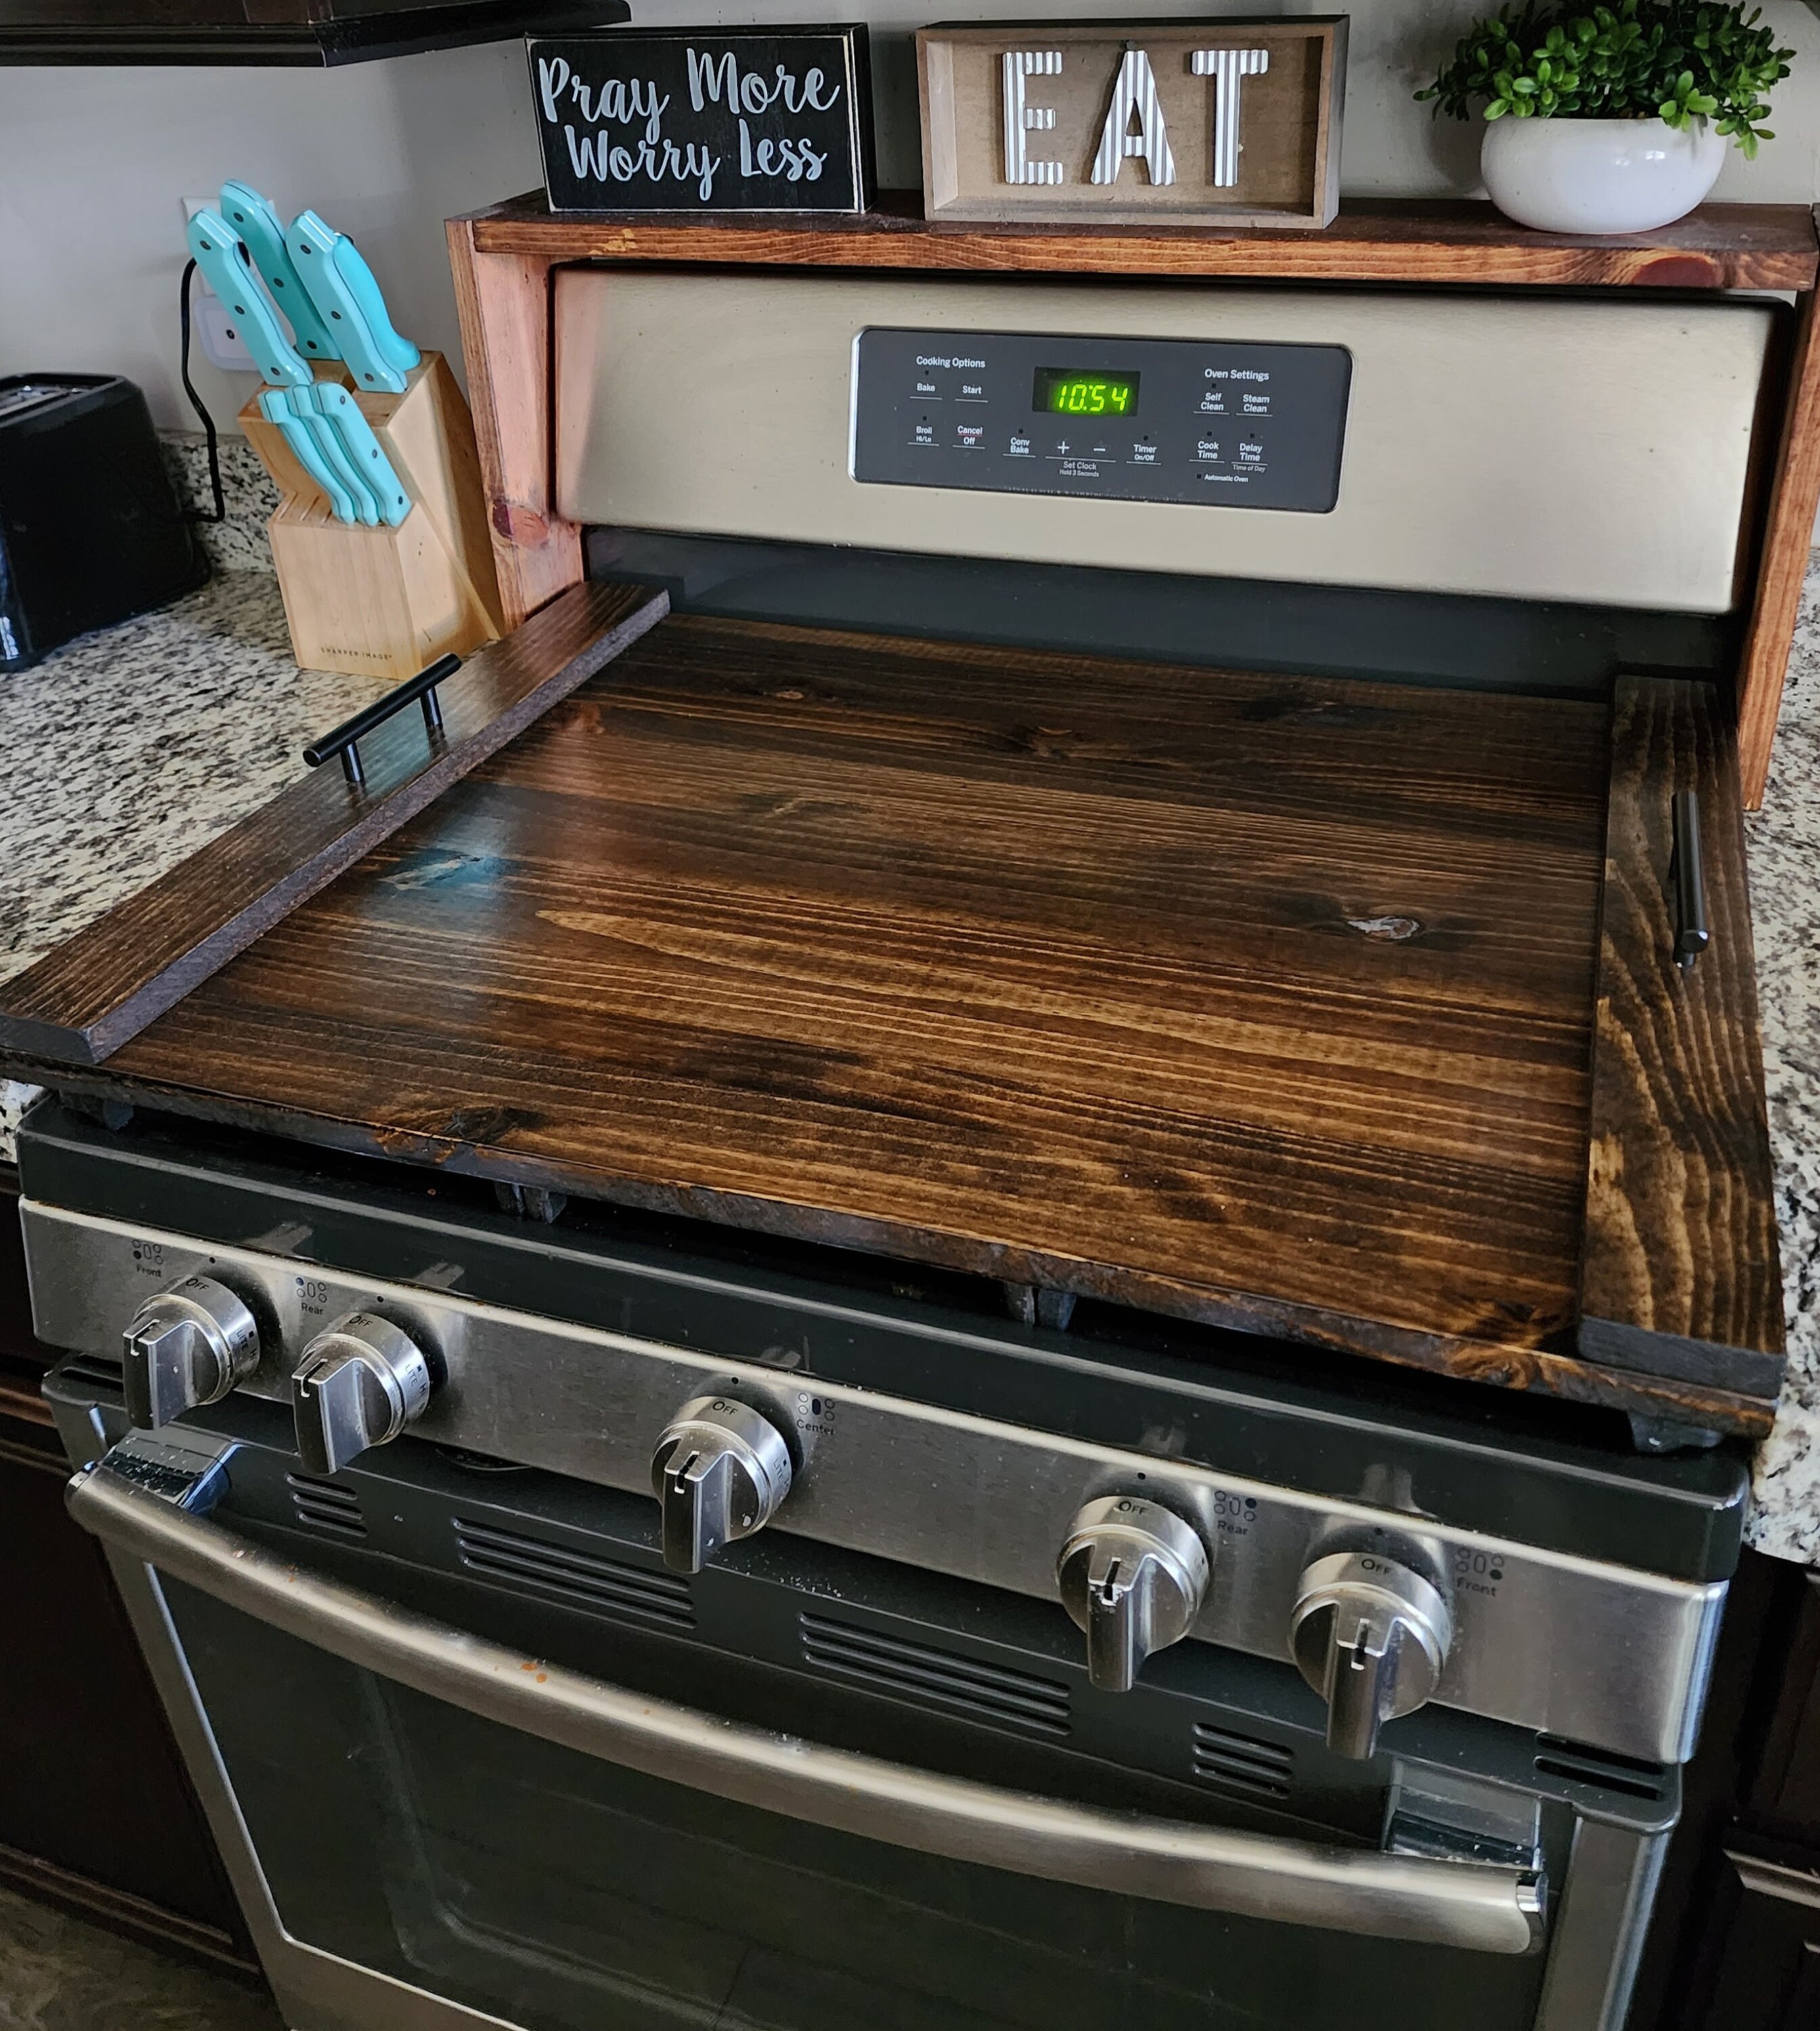 Grey Wash Stovetop cover - Signs for Design